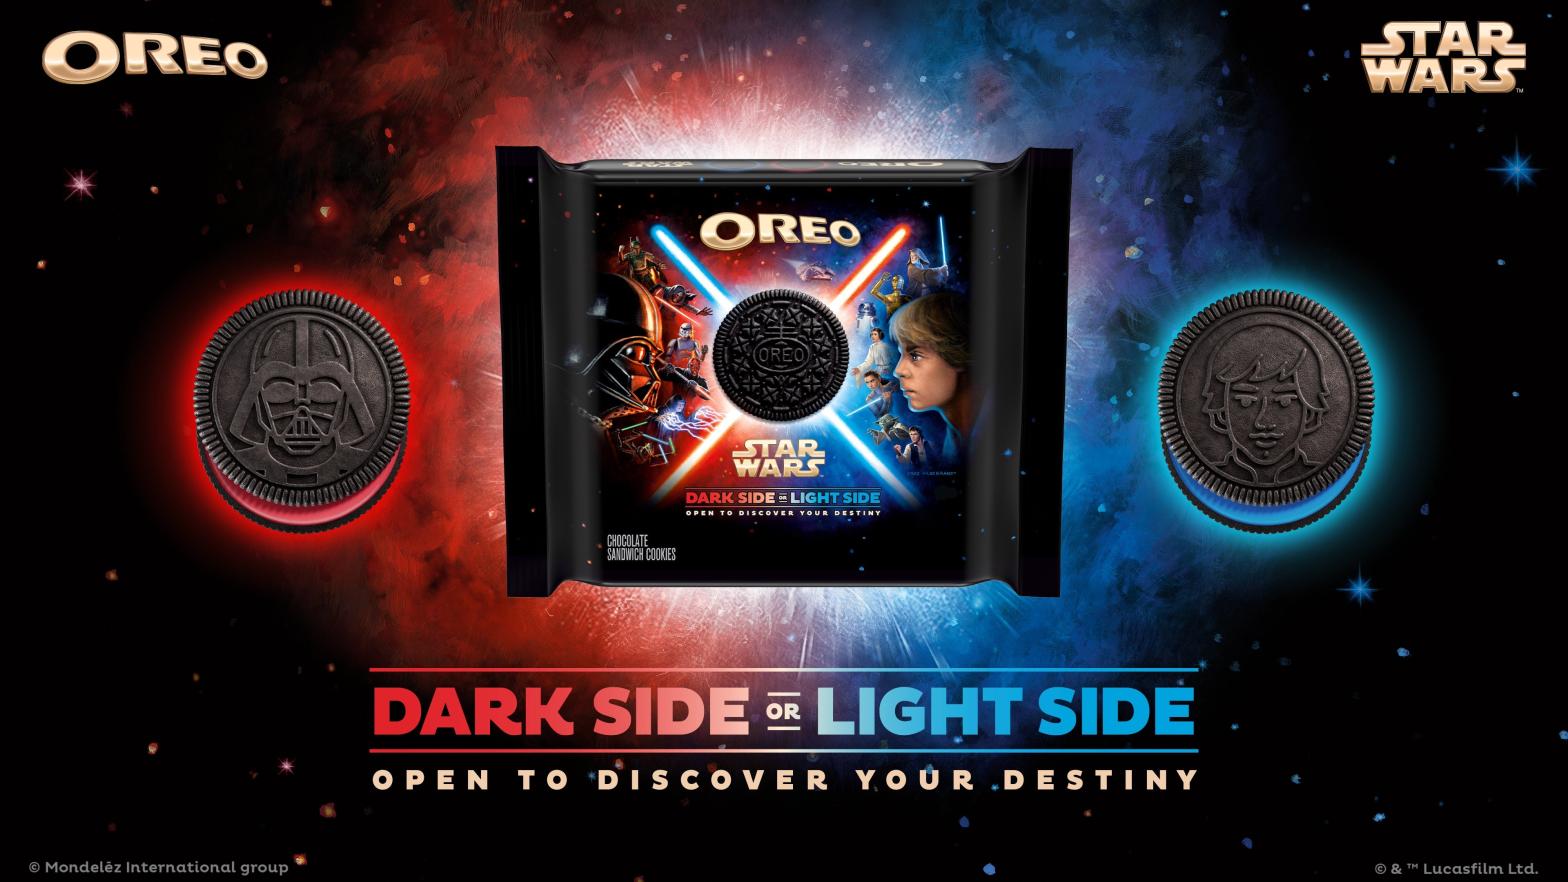 Oreo’s Special Edition Star Wars Cookies Are Here to Feed Your Inner Wookiee